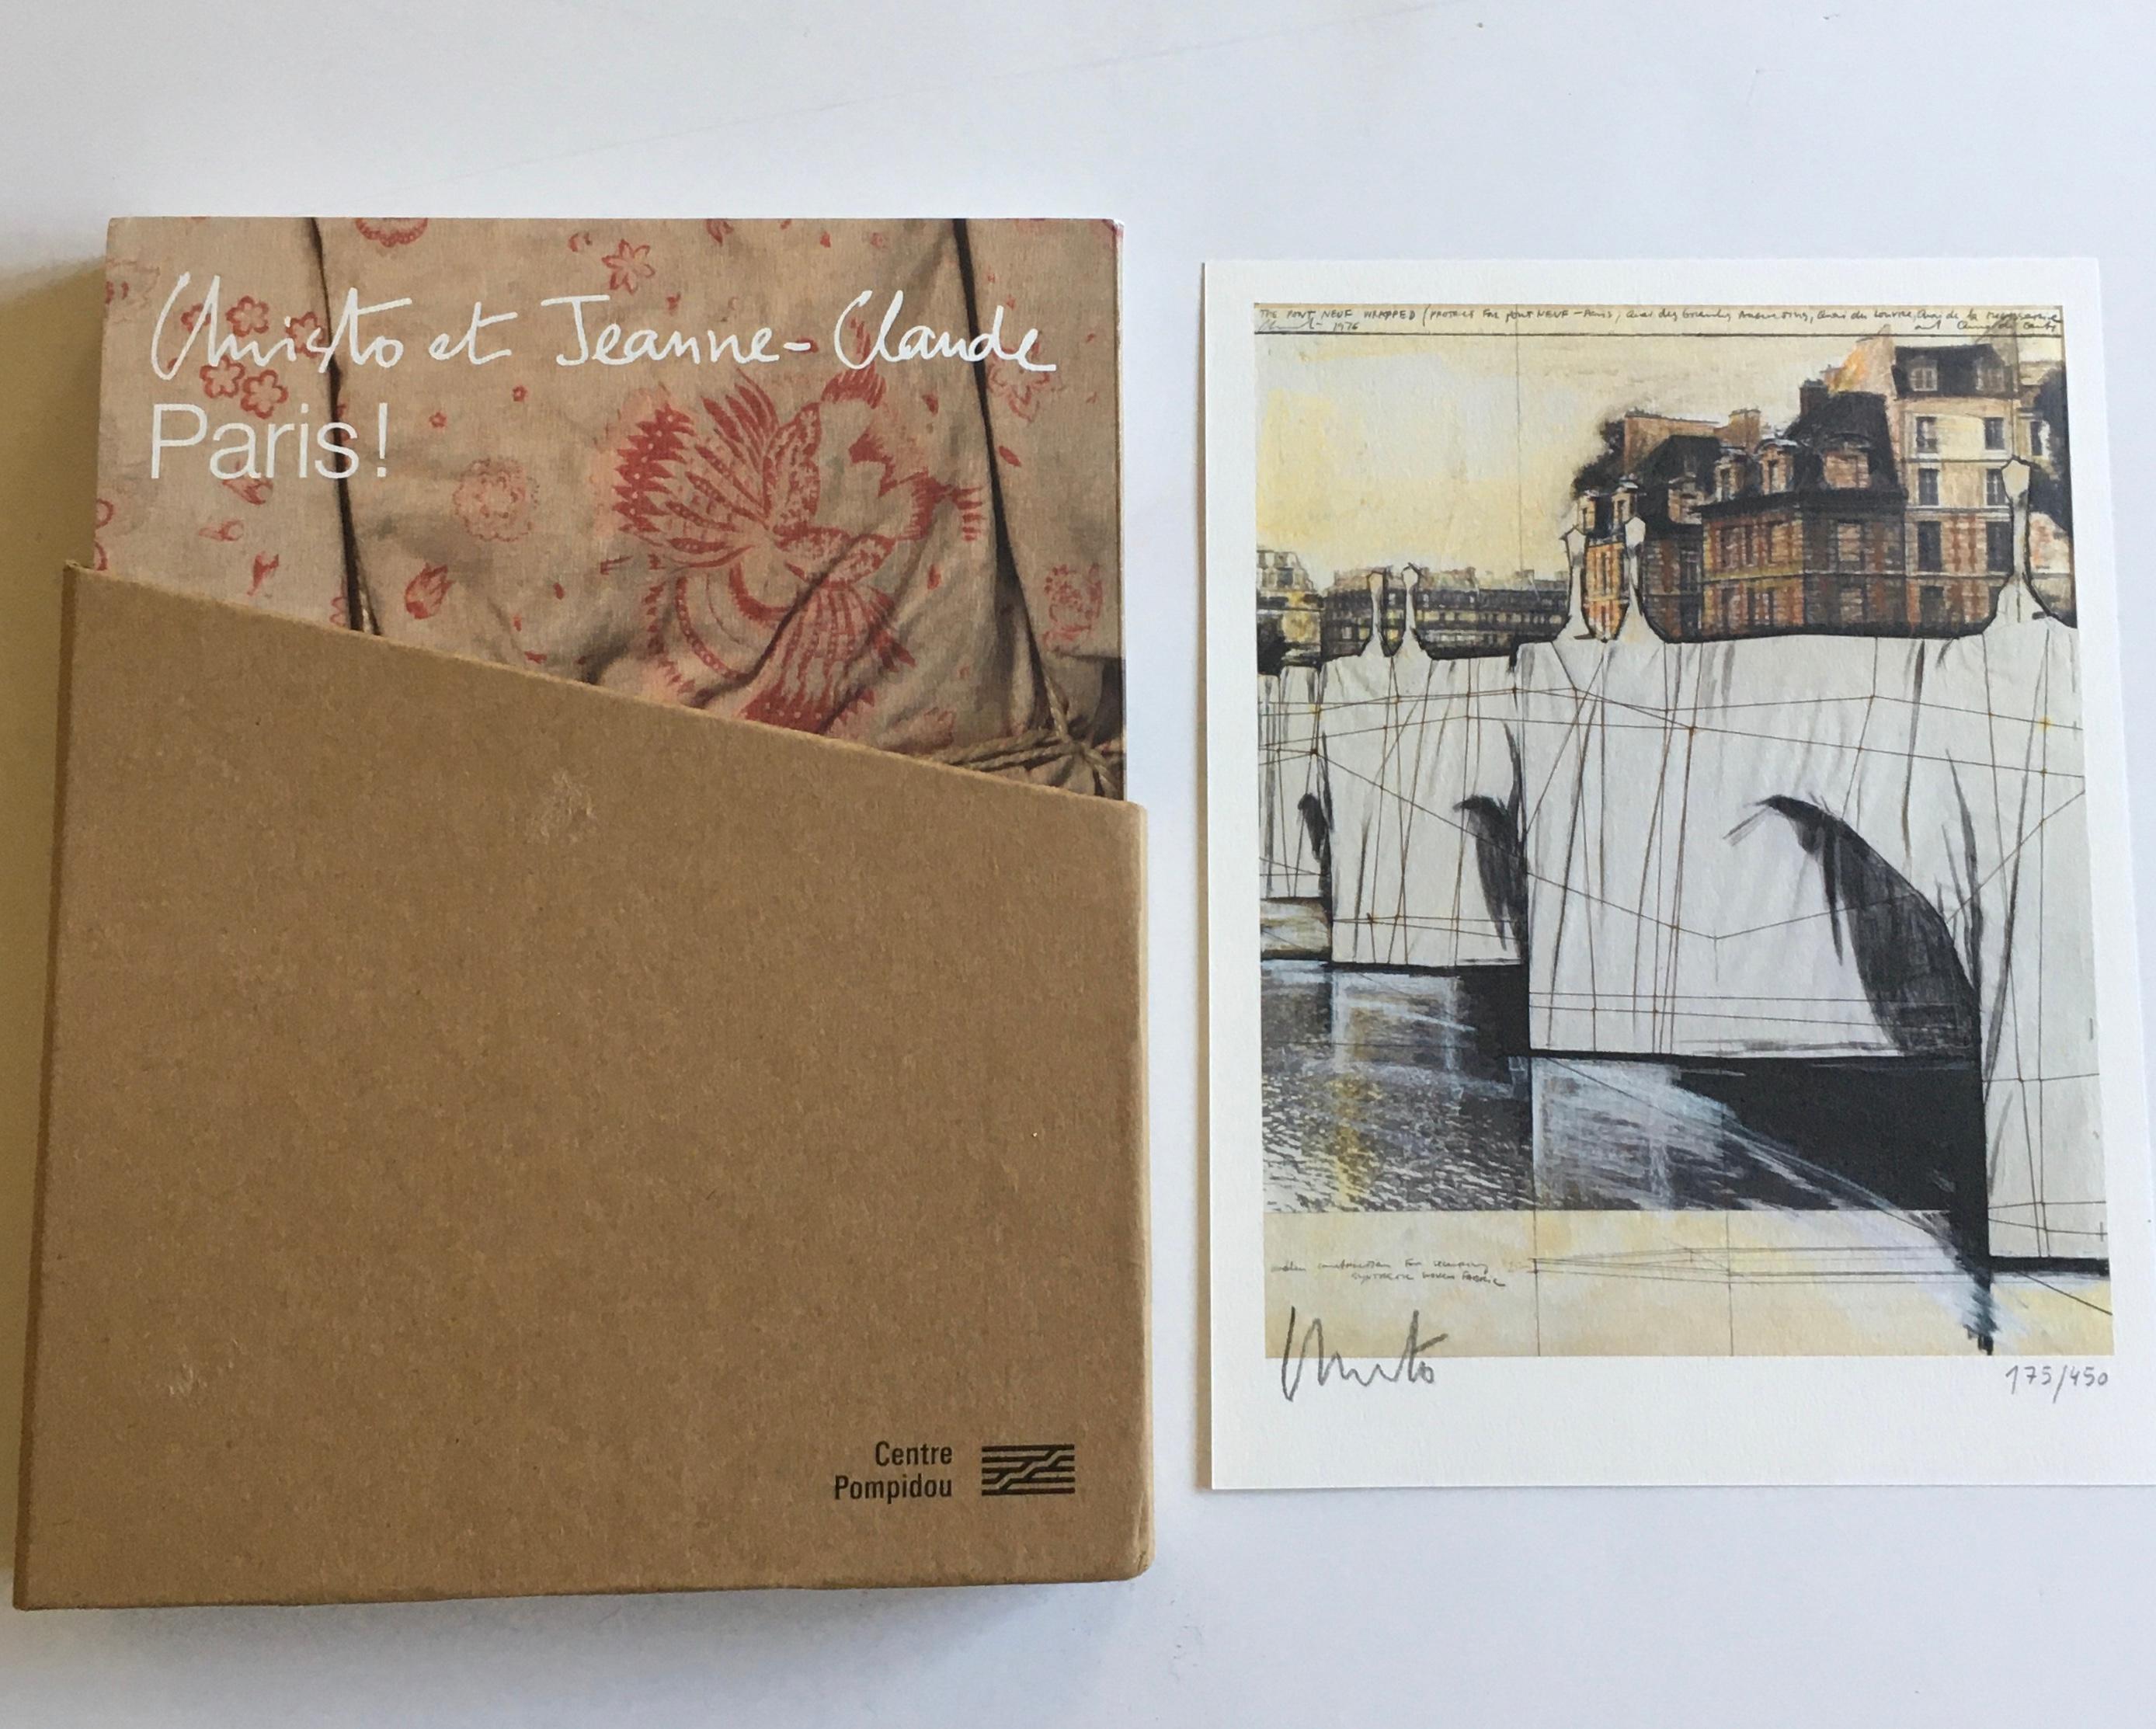 Christo et Jenne Claude, Paris! The Pont-Neuf Wrapped, Signed Print and Catalog - Beige Landscape Print by Christo and Jeanne-Claude